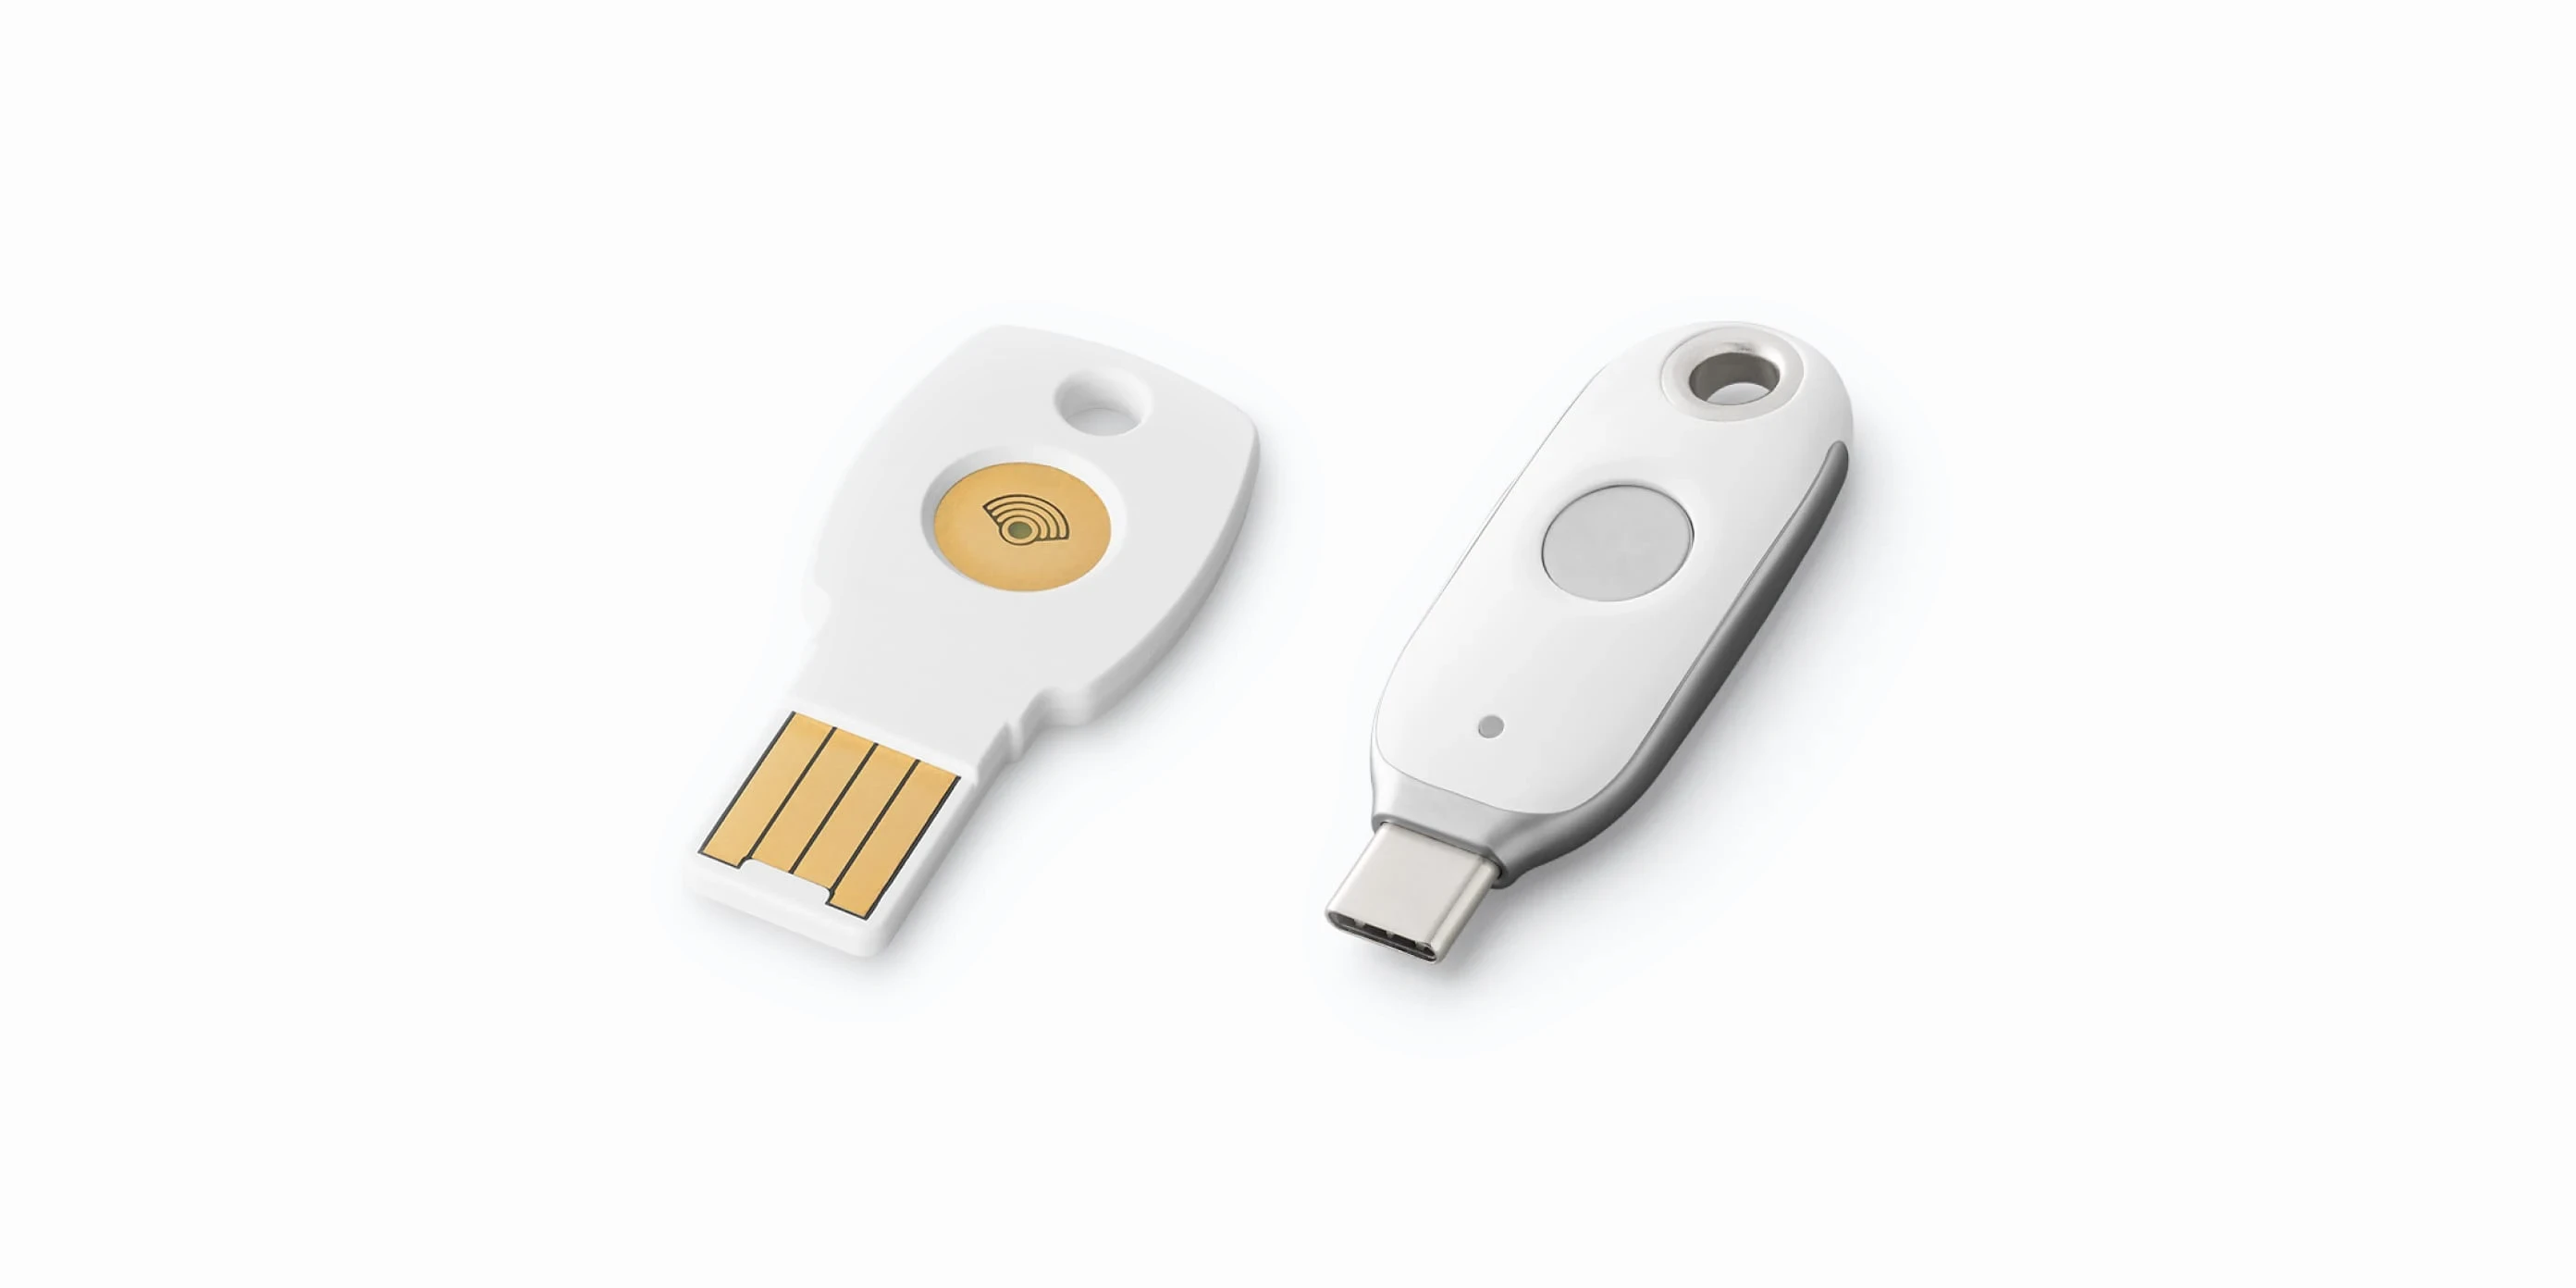 Two Titan security keys, one USB-A and one USB-C